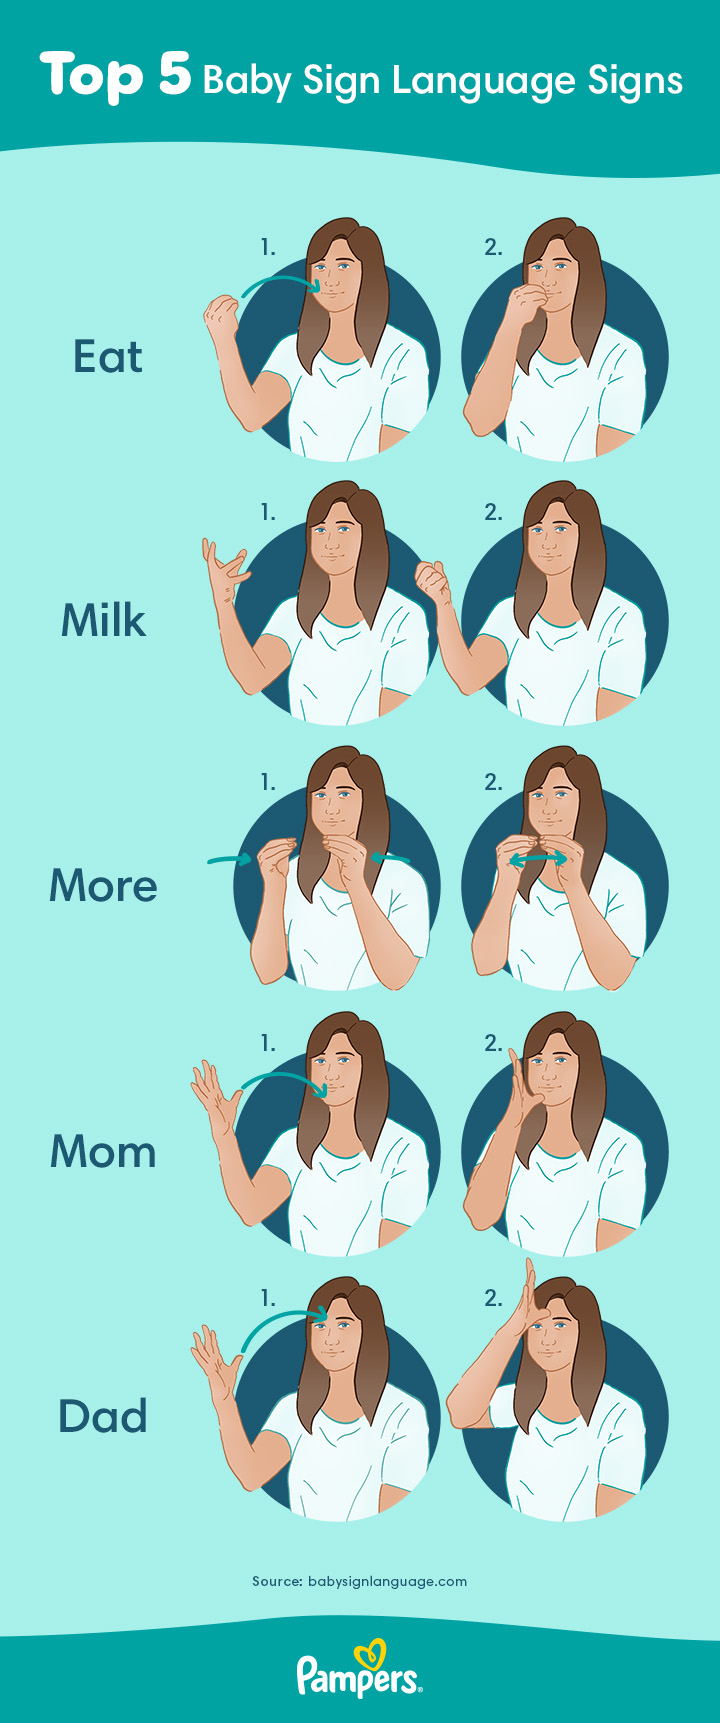 How To Teach Baby Sign Language: Signs and Tips | Pampers